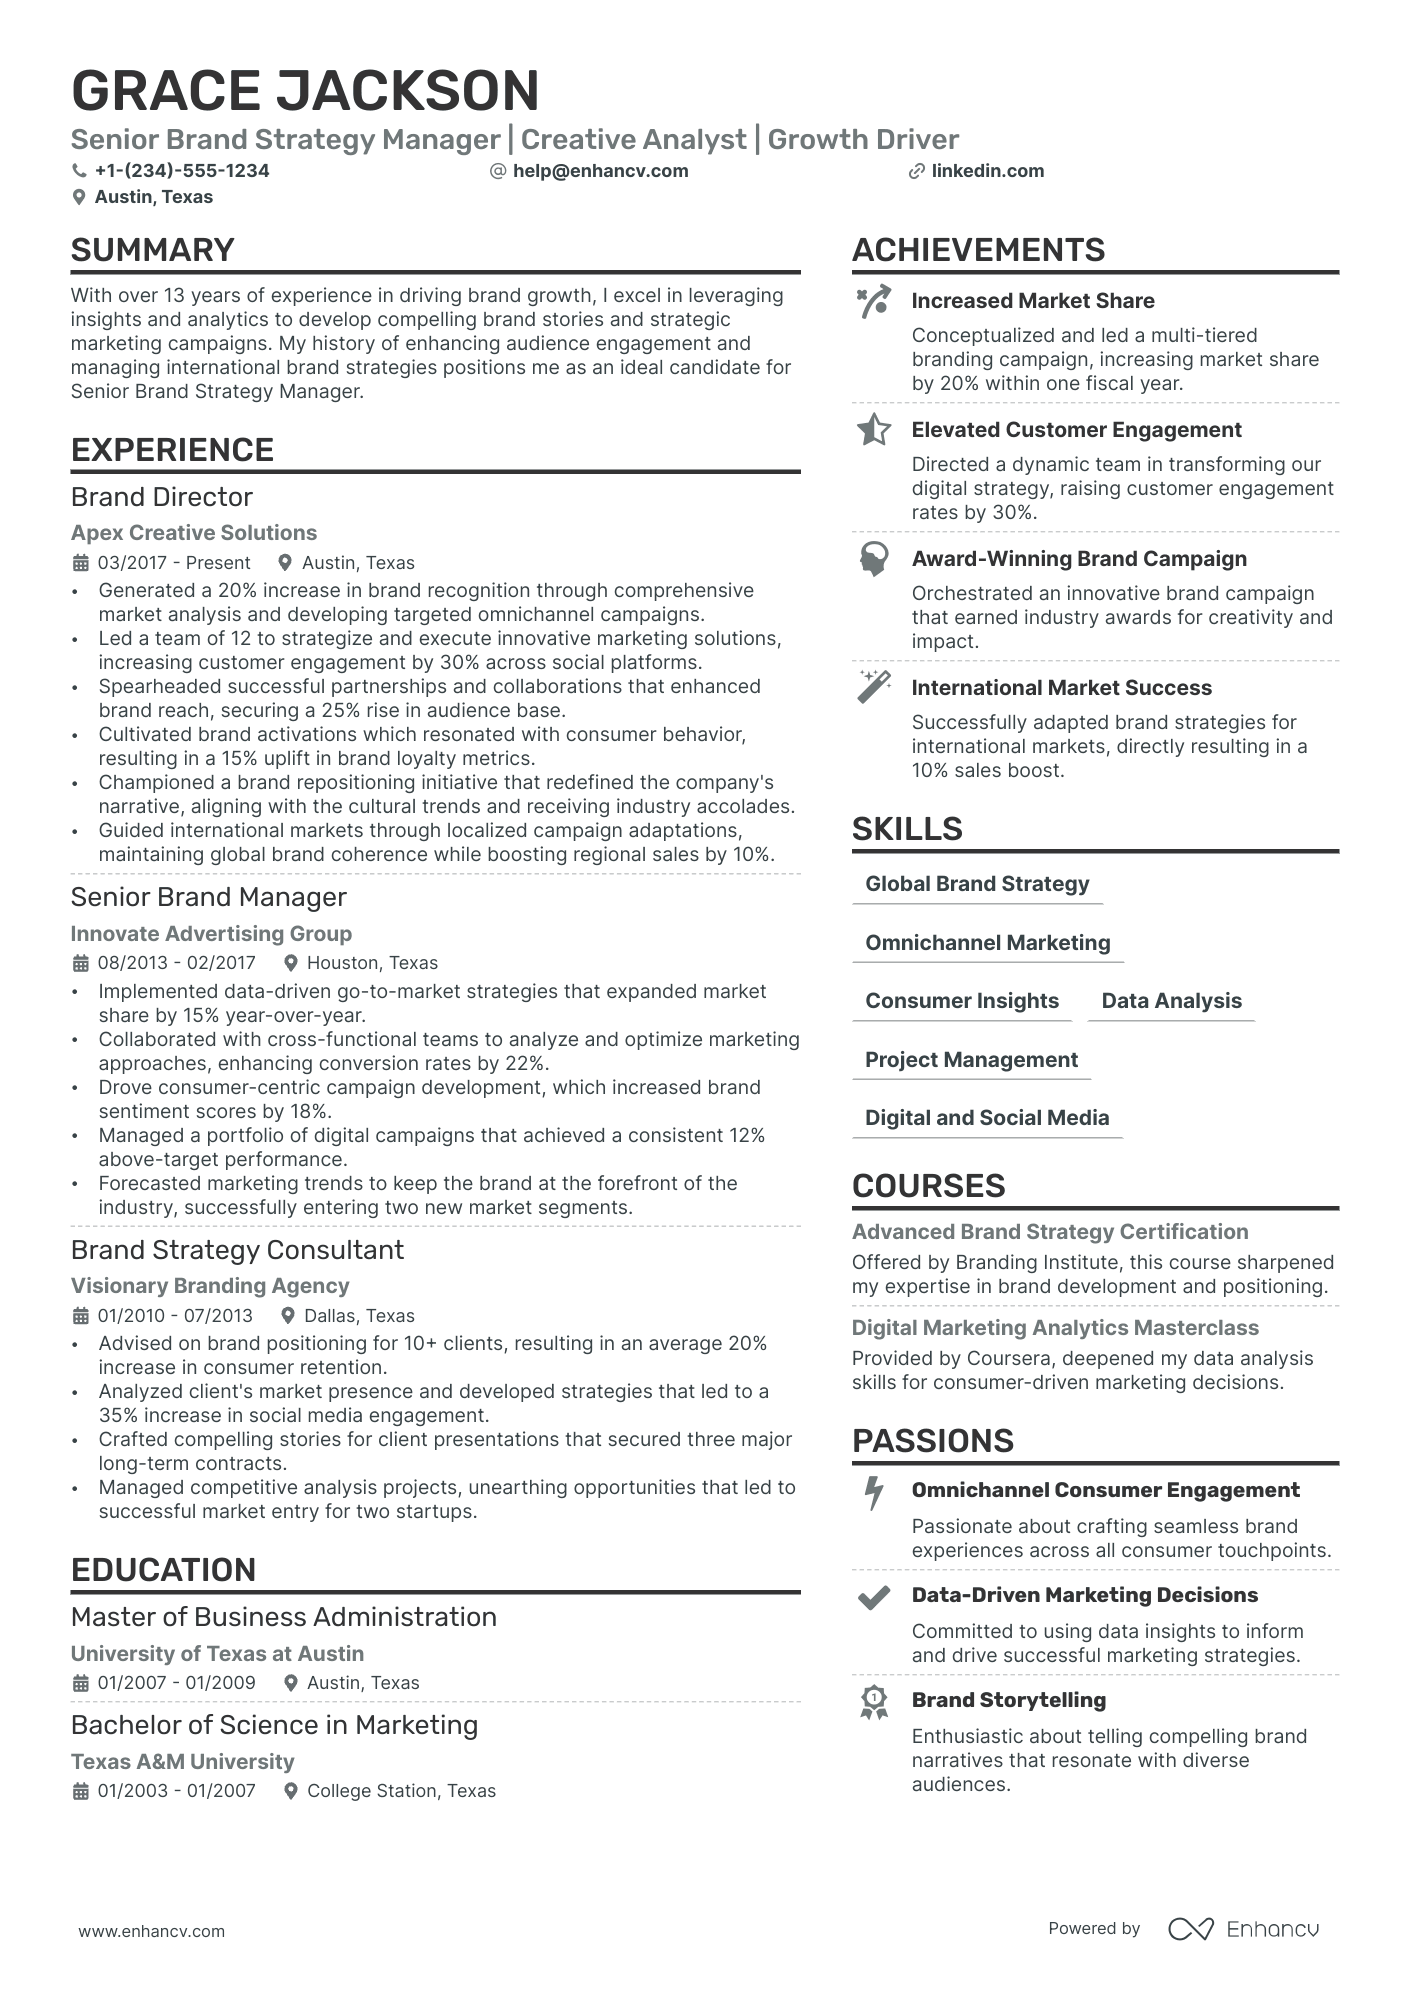 Strategy Manager resume example